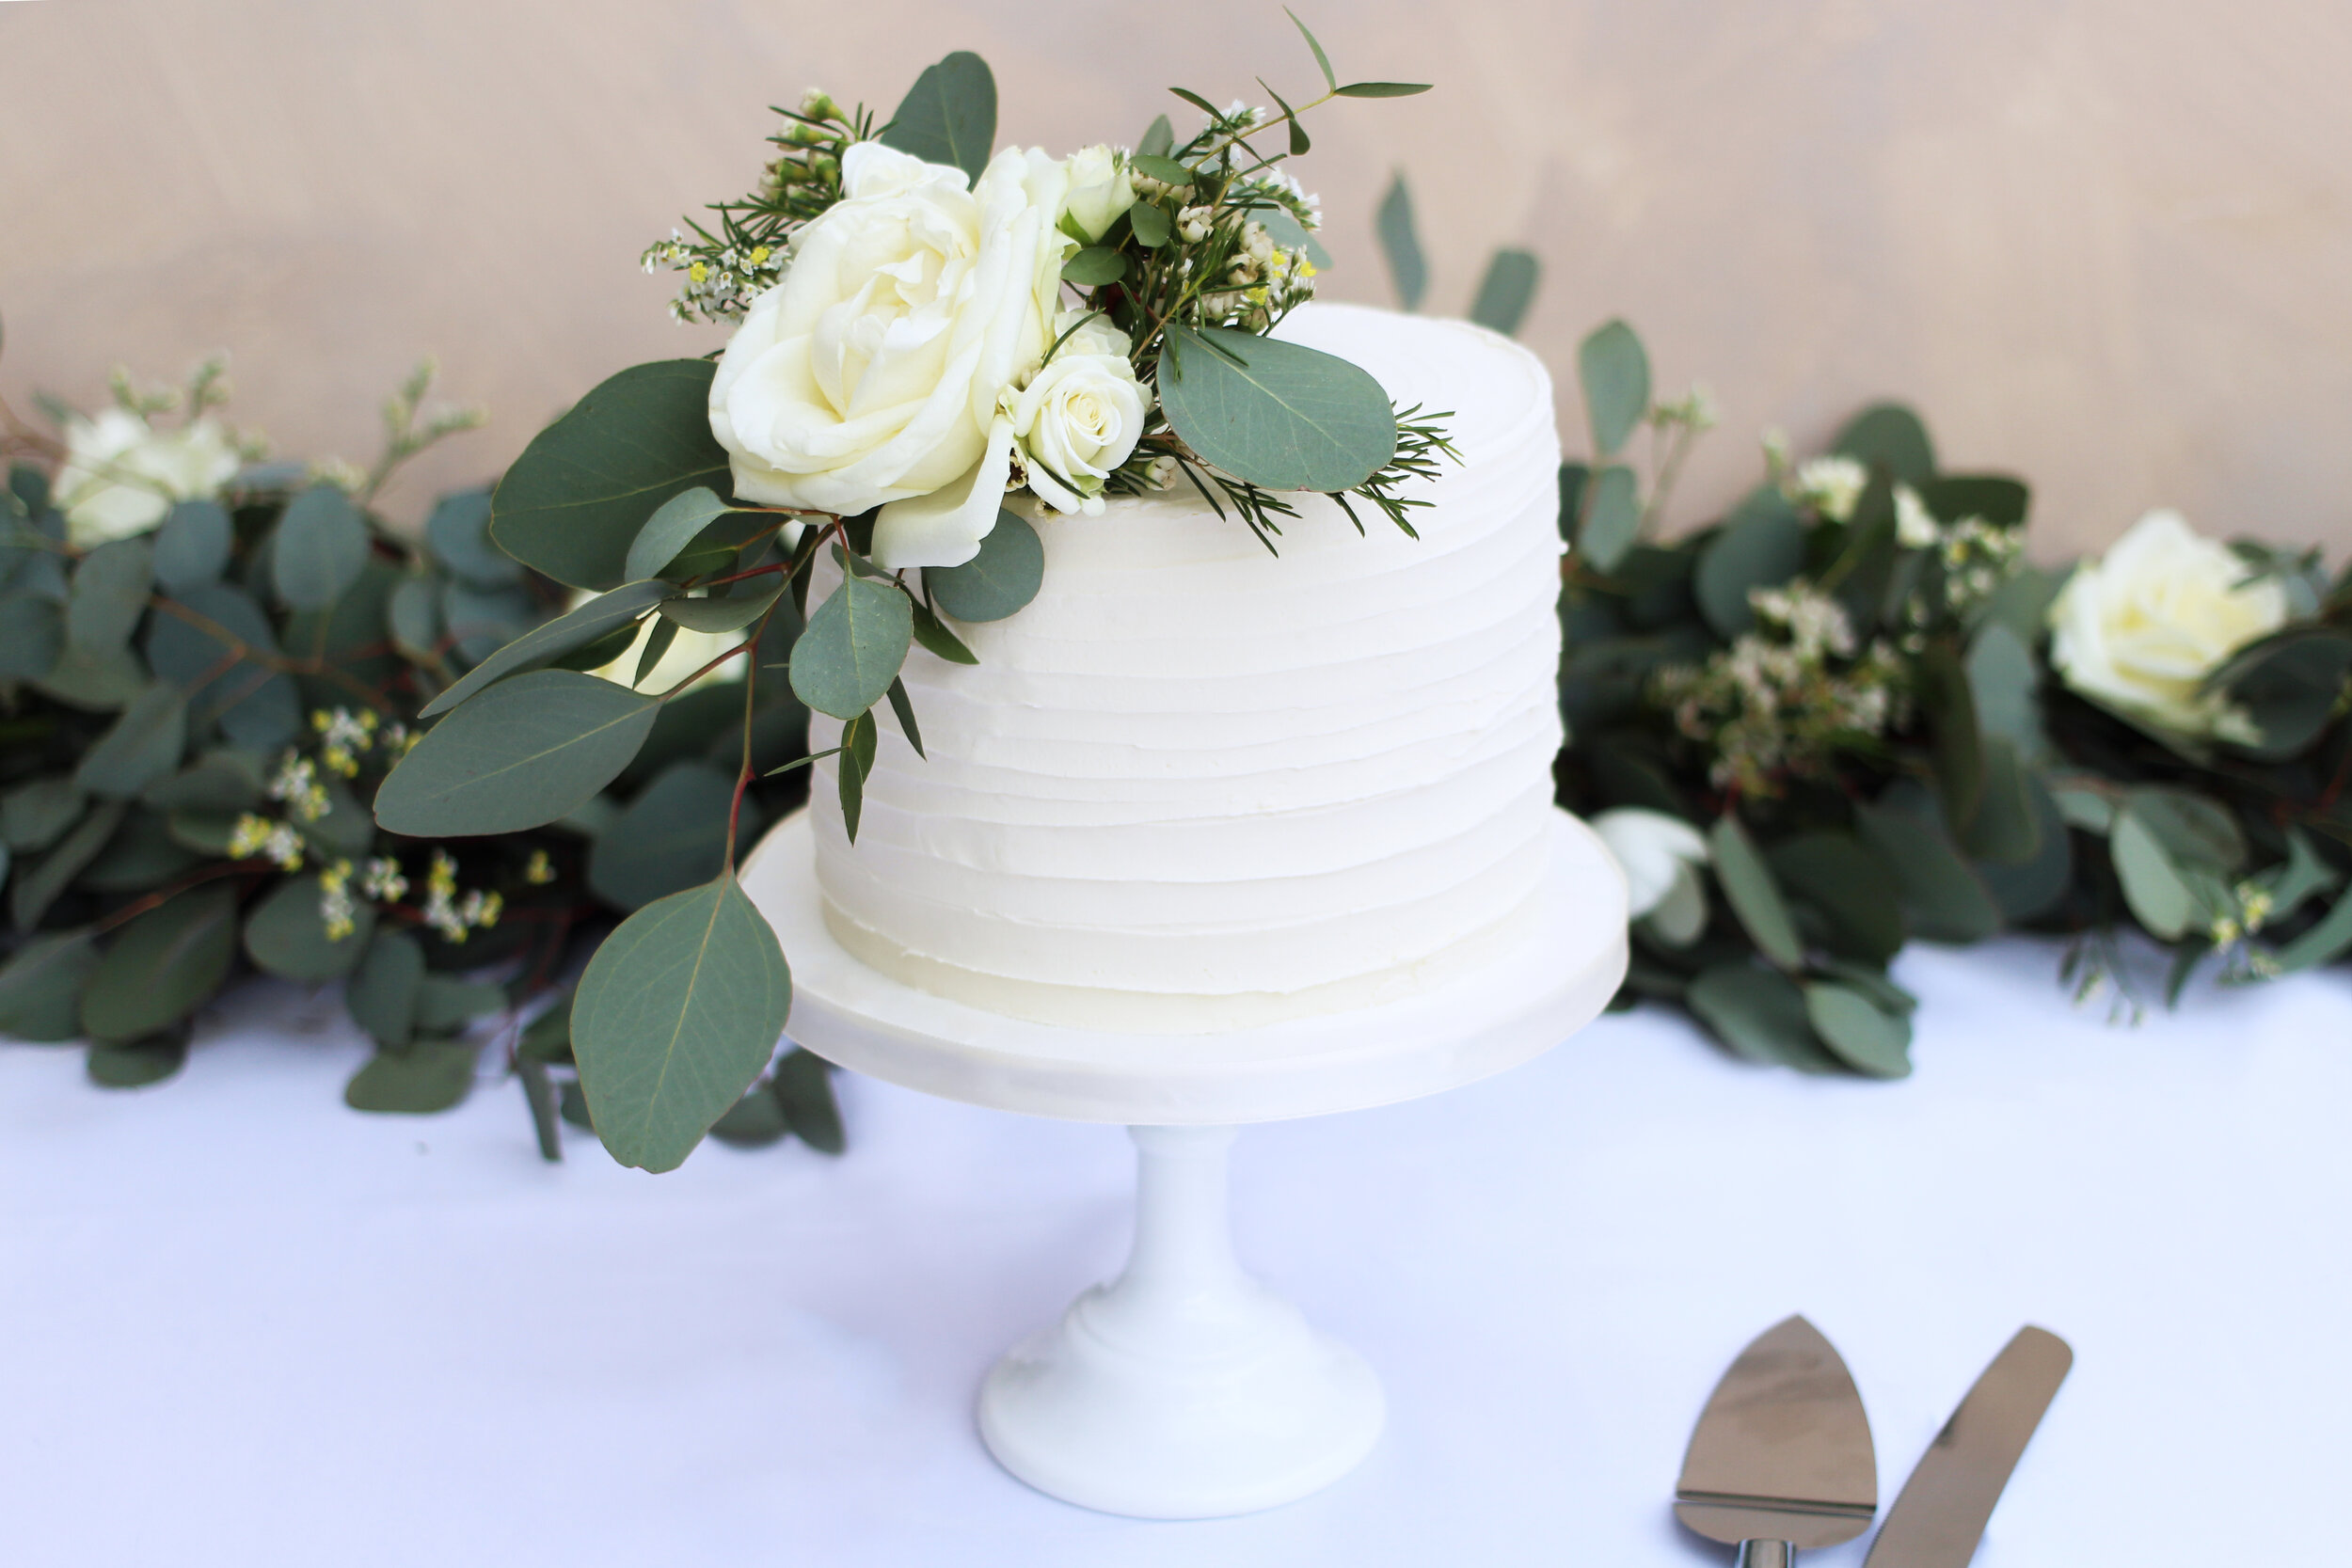 Cake Toppers| The Floral Touch UK | Cake Tier Displays